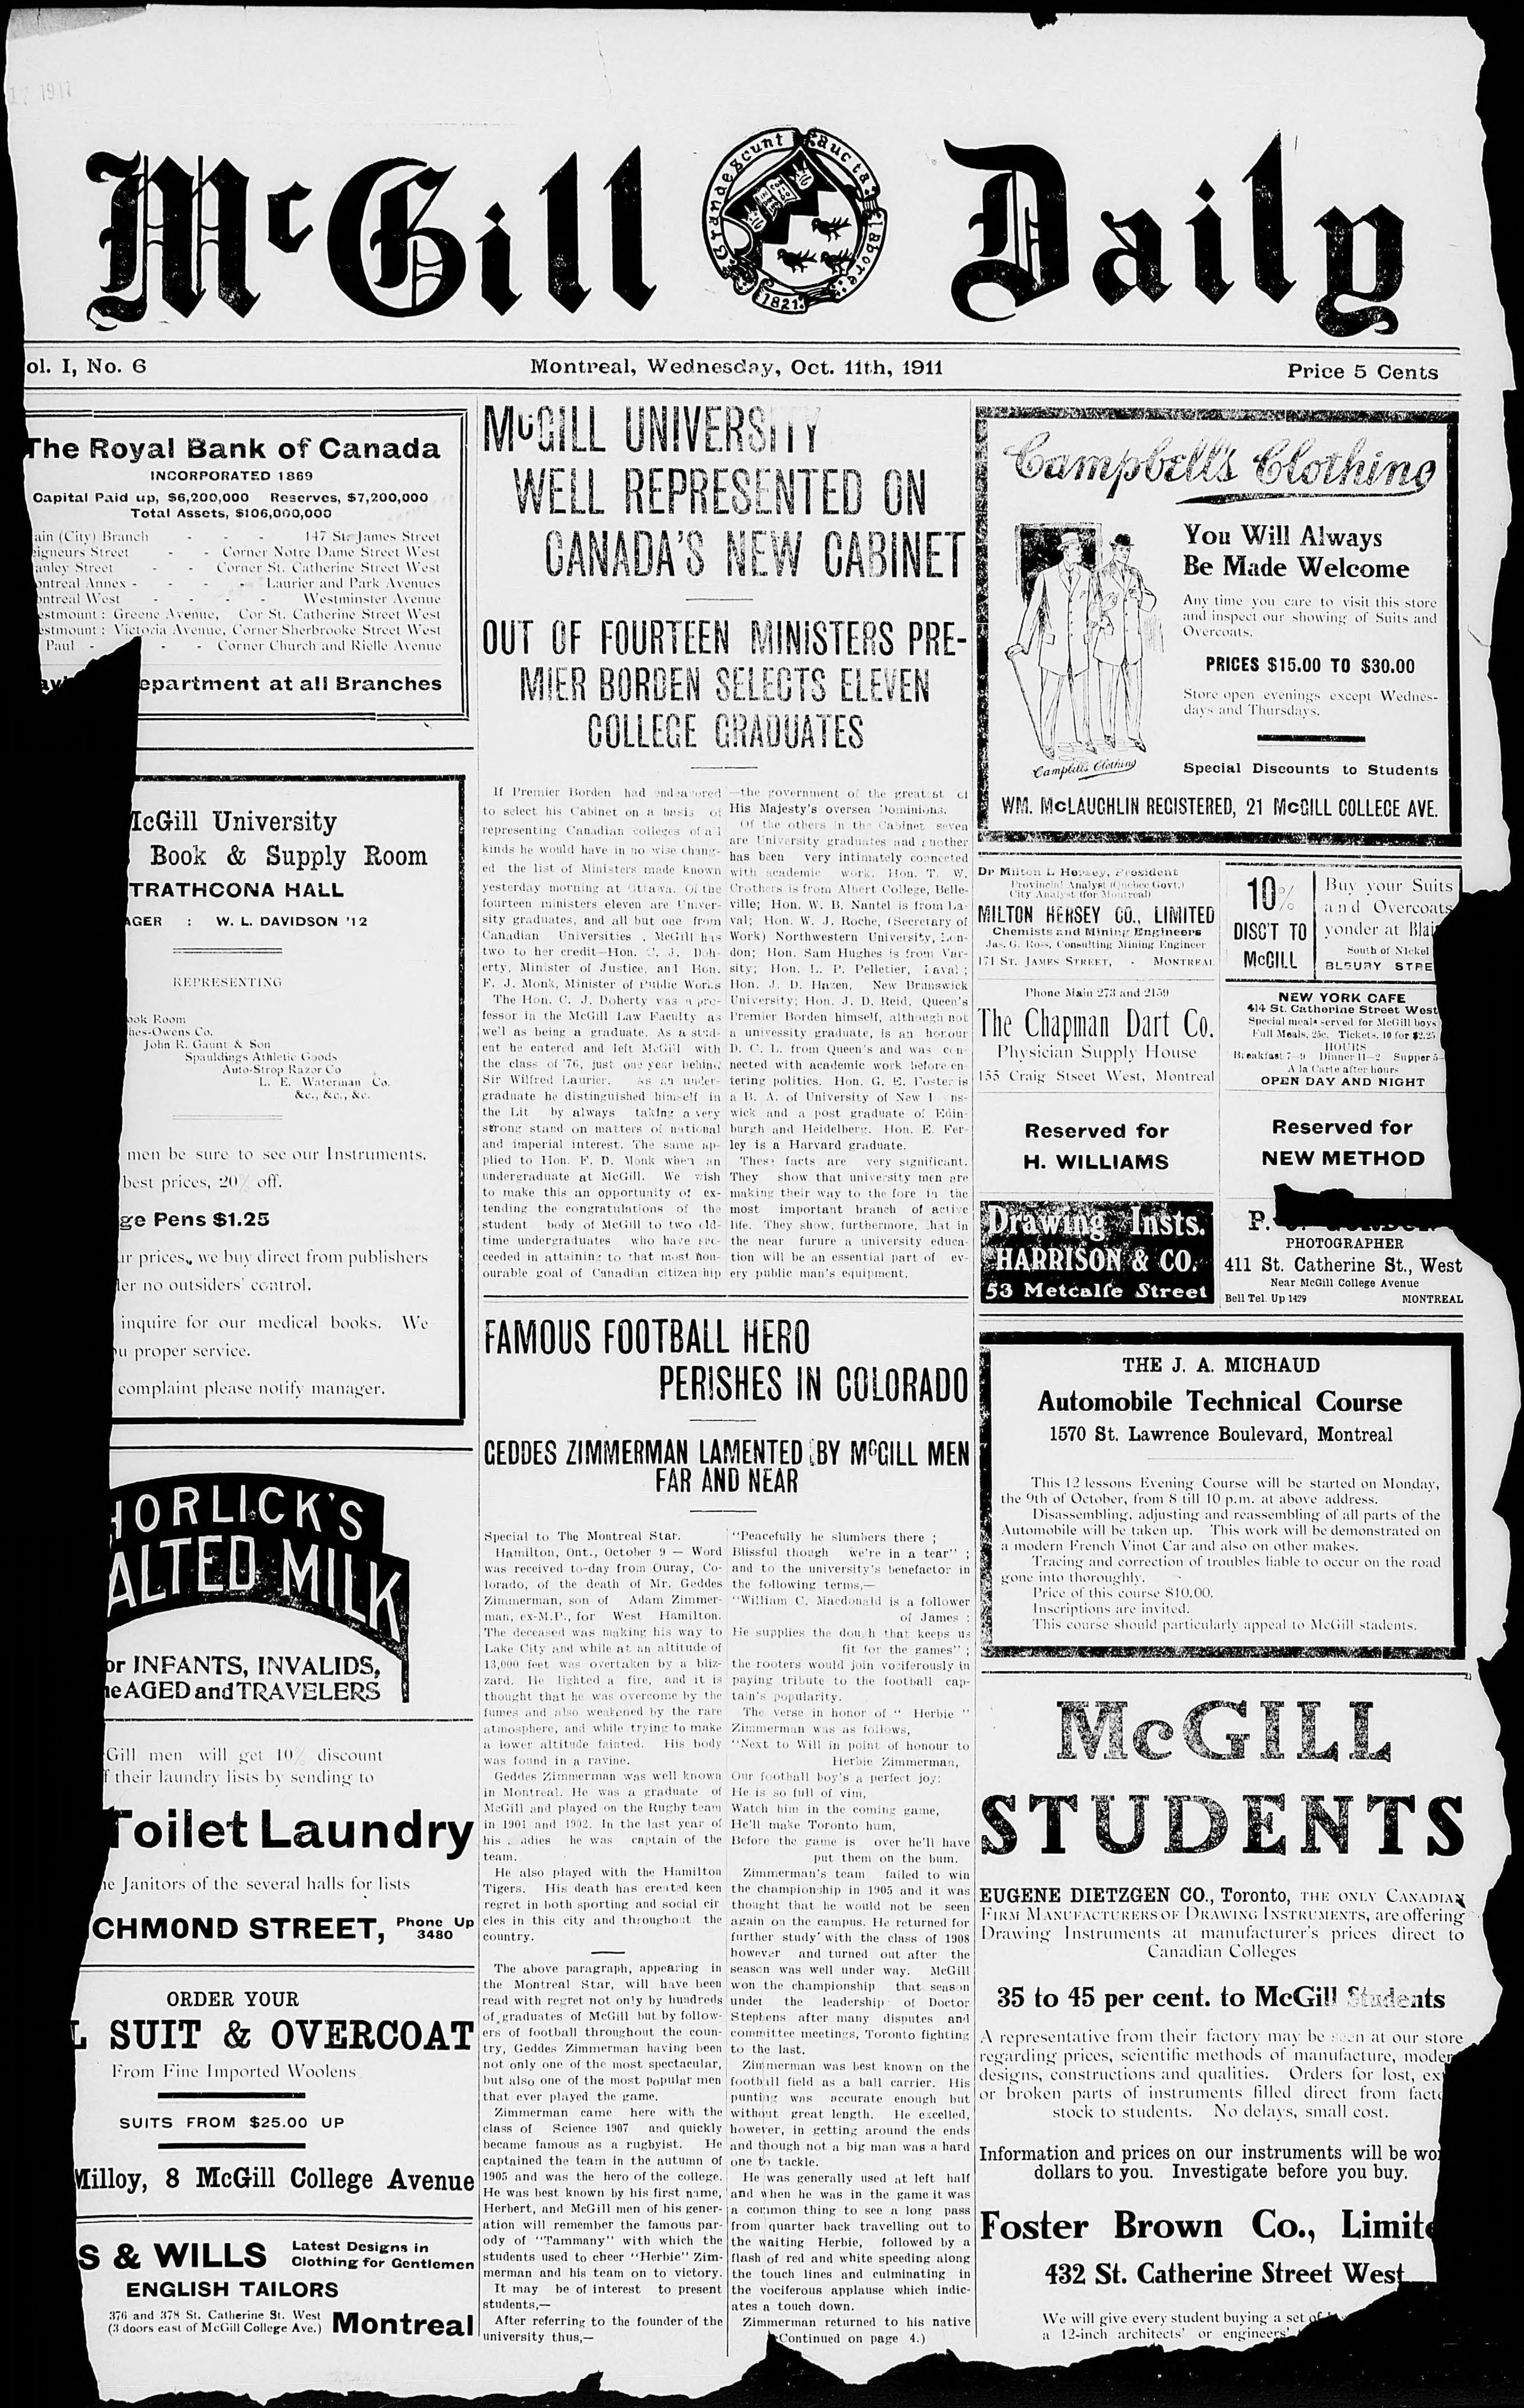 Front page of The McGill Daily Vol. 01 No. 6: October 11, 1911